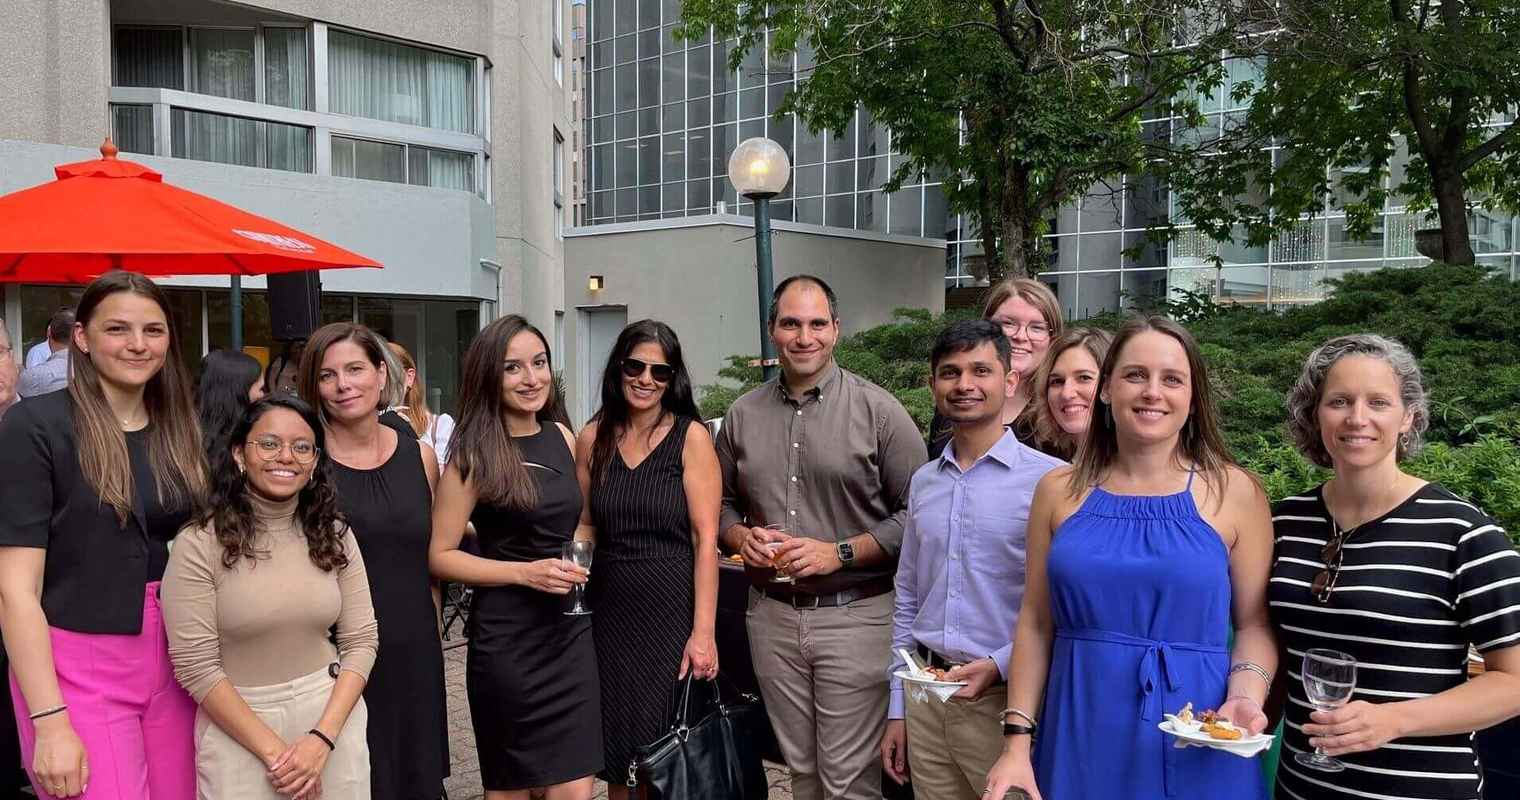 A group of Gildan employees from the Corporate Head Office in Montreal are smiling while outside.